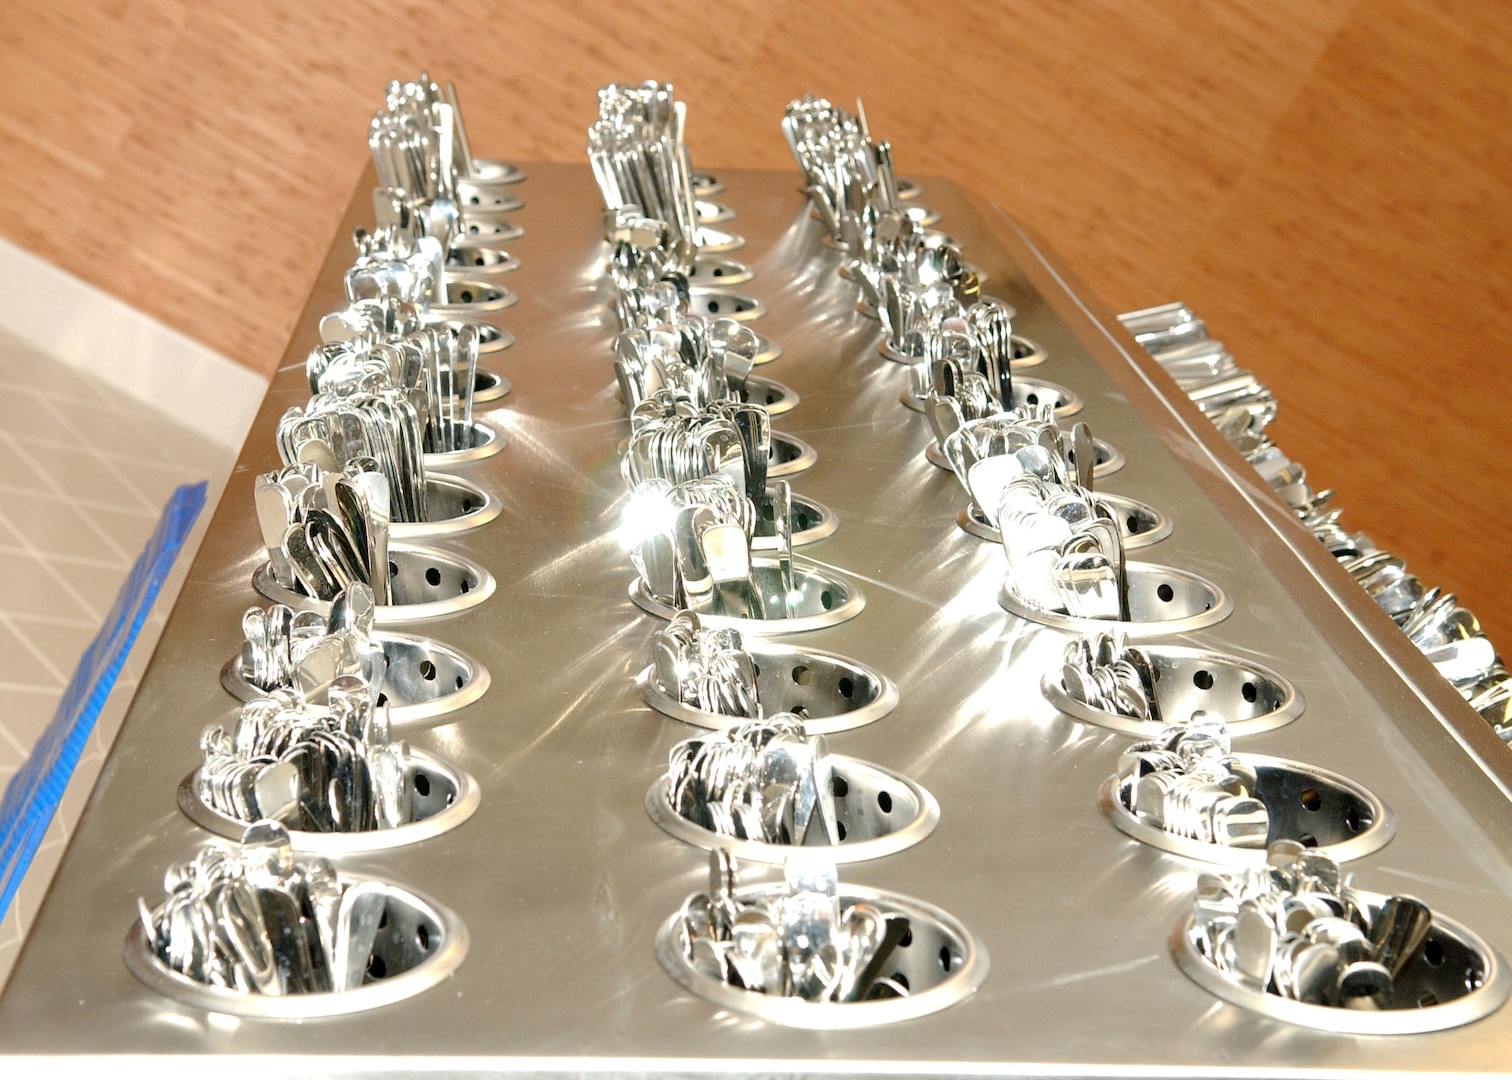 Silverware glisten in their trays on opening day of the new dining facility on the Lackland Training Annex at Lackland Air Force Base, Texas. The dining facility mainly serves technical students and instructors from the 342nd, 343rd and 344th Training Squadrons, and members of the 90th Intelligence Squadron. The facility can hold up to 1,500 diners, has four serving lines and three dining areas, and has modern lighting and wooden floors. Construction of the dining facility, which replaced the 35-year-old Medina Inn, is among $60.3 million in major building projects scheduled for opening early this year.